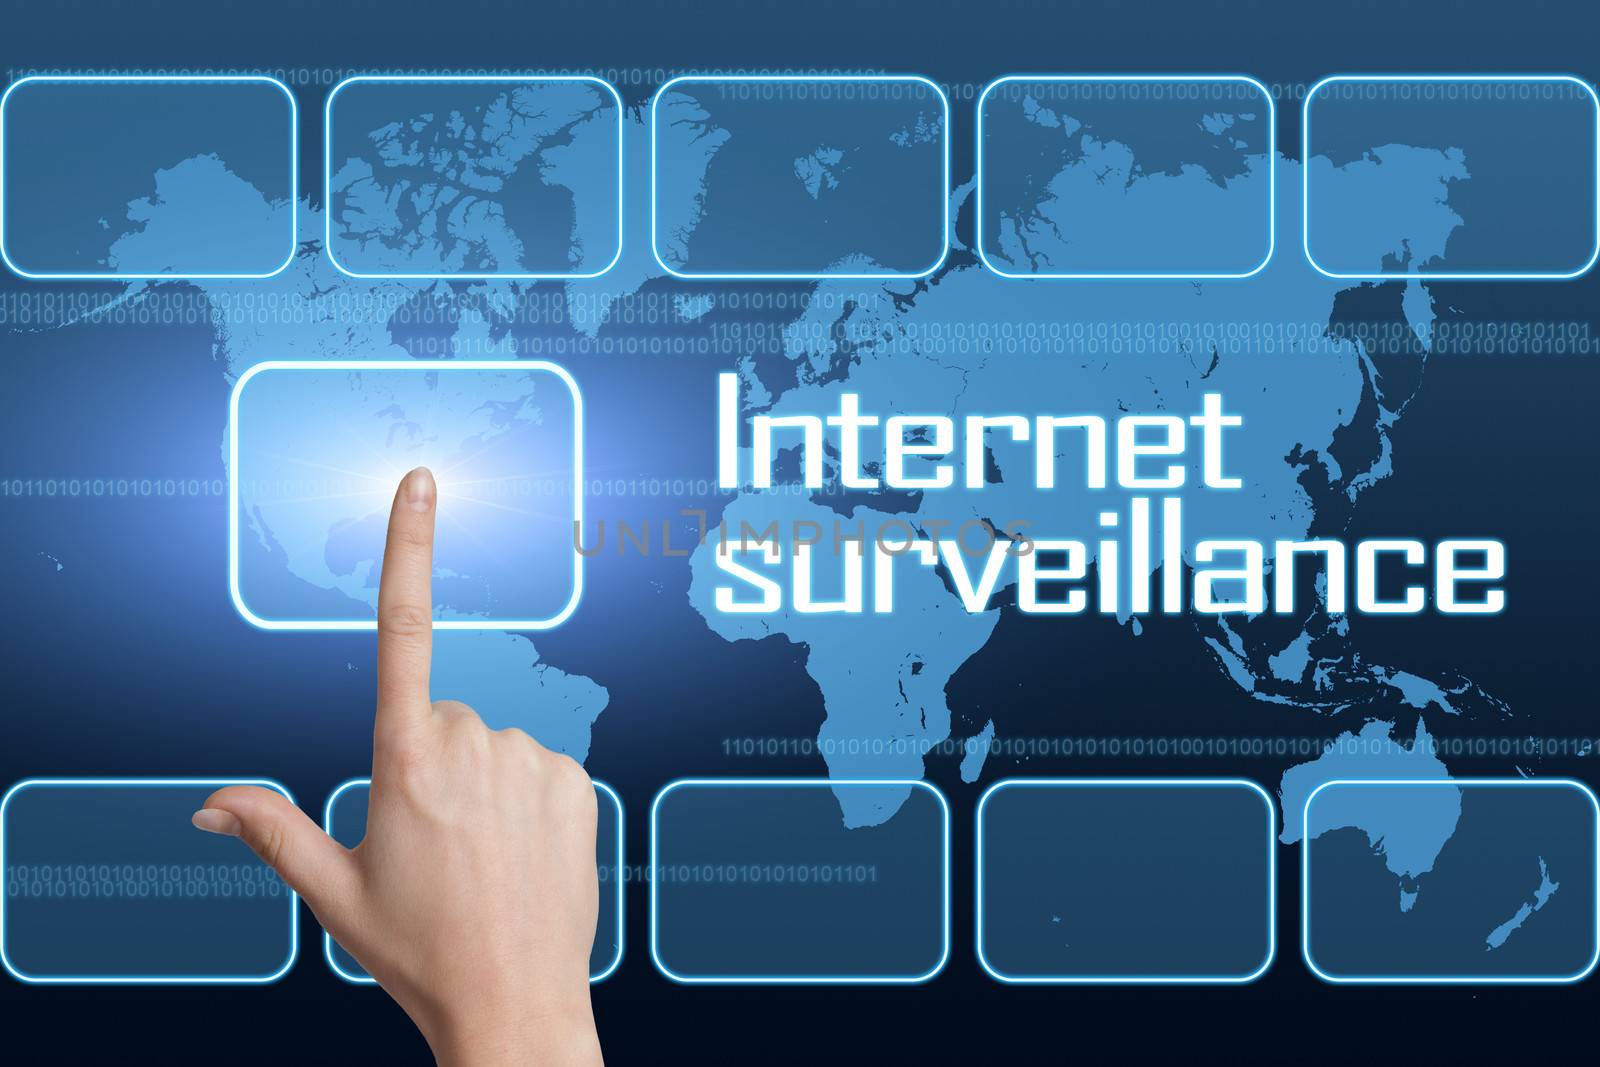 Internet surveillance concept with interface and world map on blue background